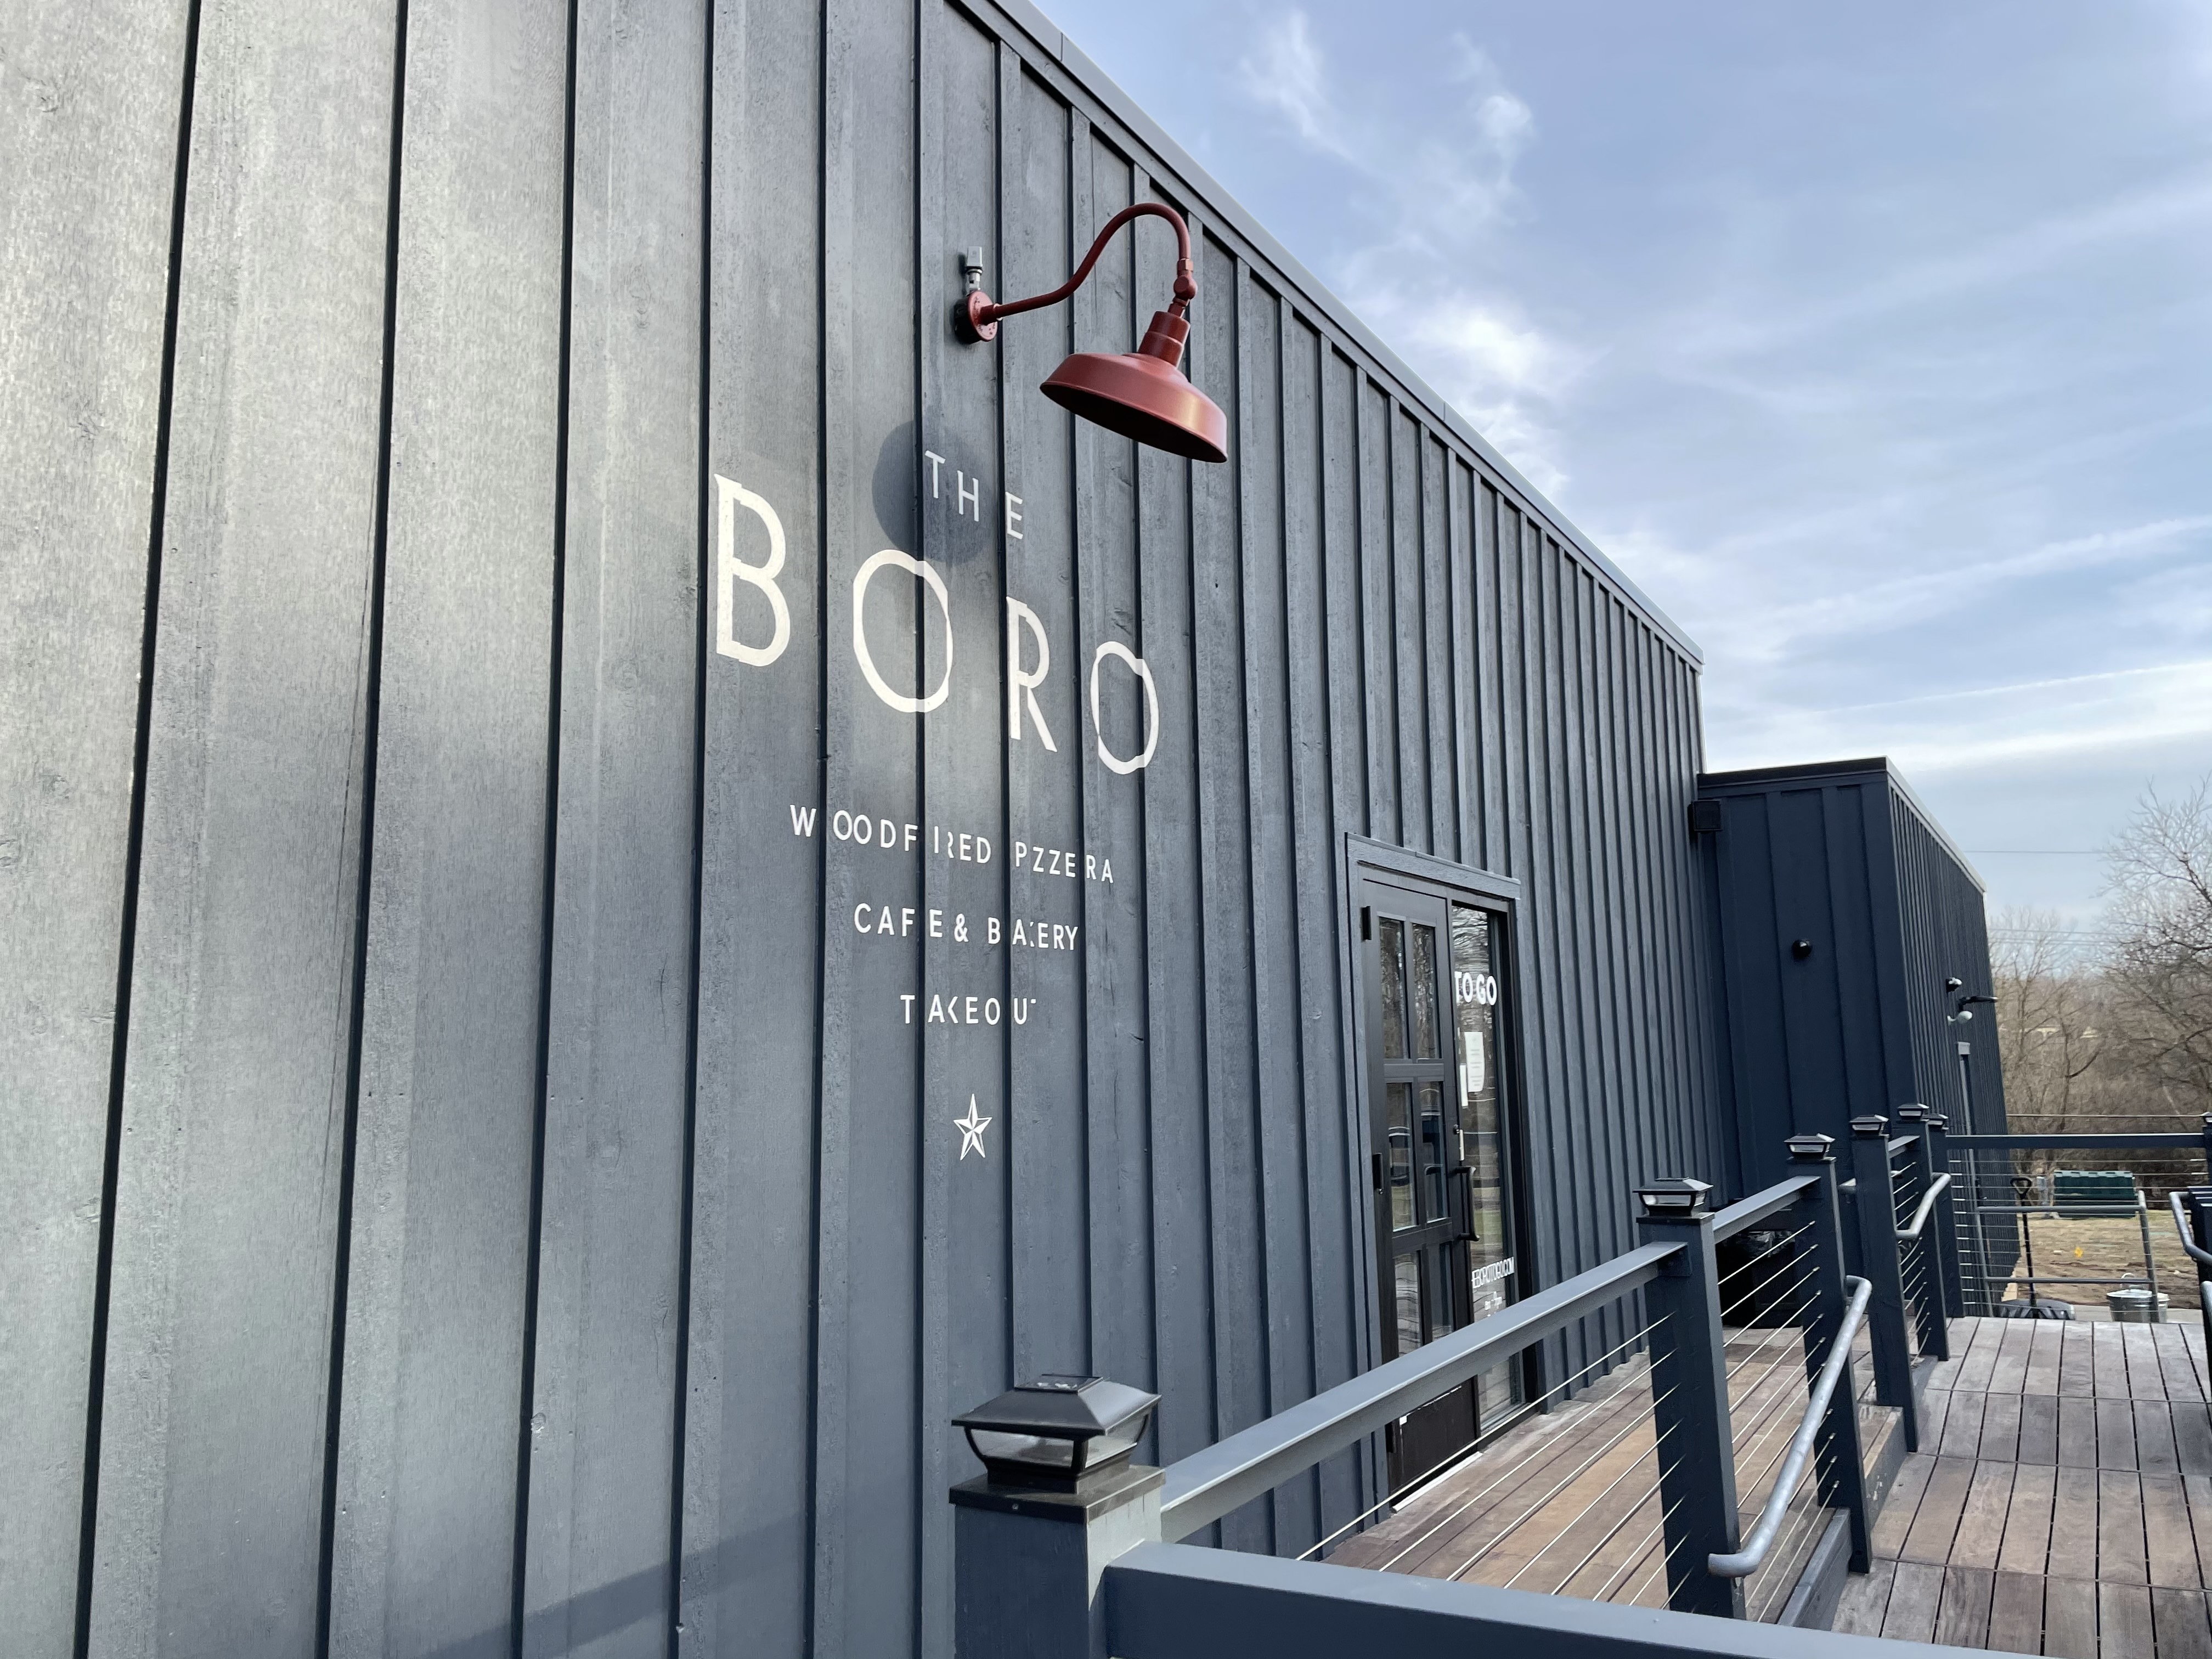 The gray wooden exterior of the Boro in Ann Arbor with the name of the restaurant “The Boro” painted in white letters on the side of the building. A red metal lamp sits above the name to illuminate it at night